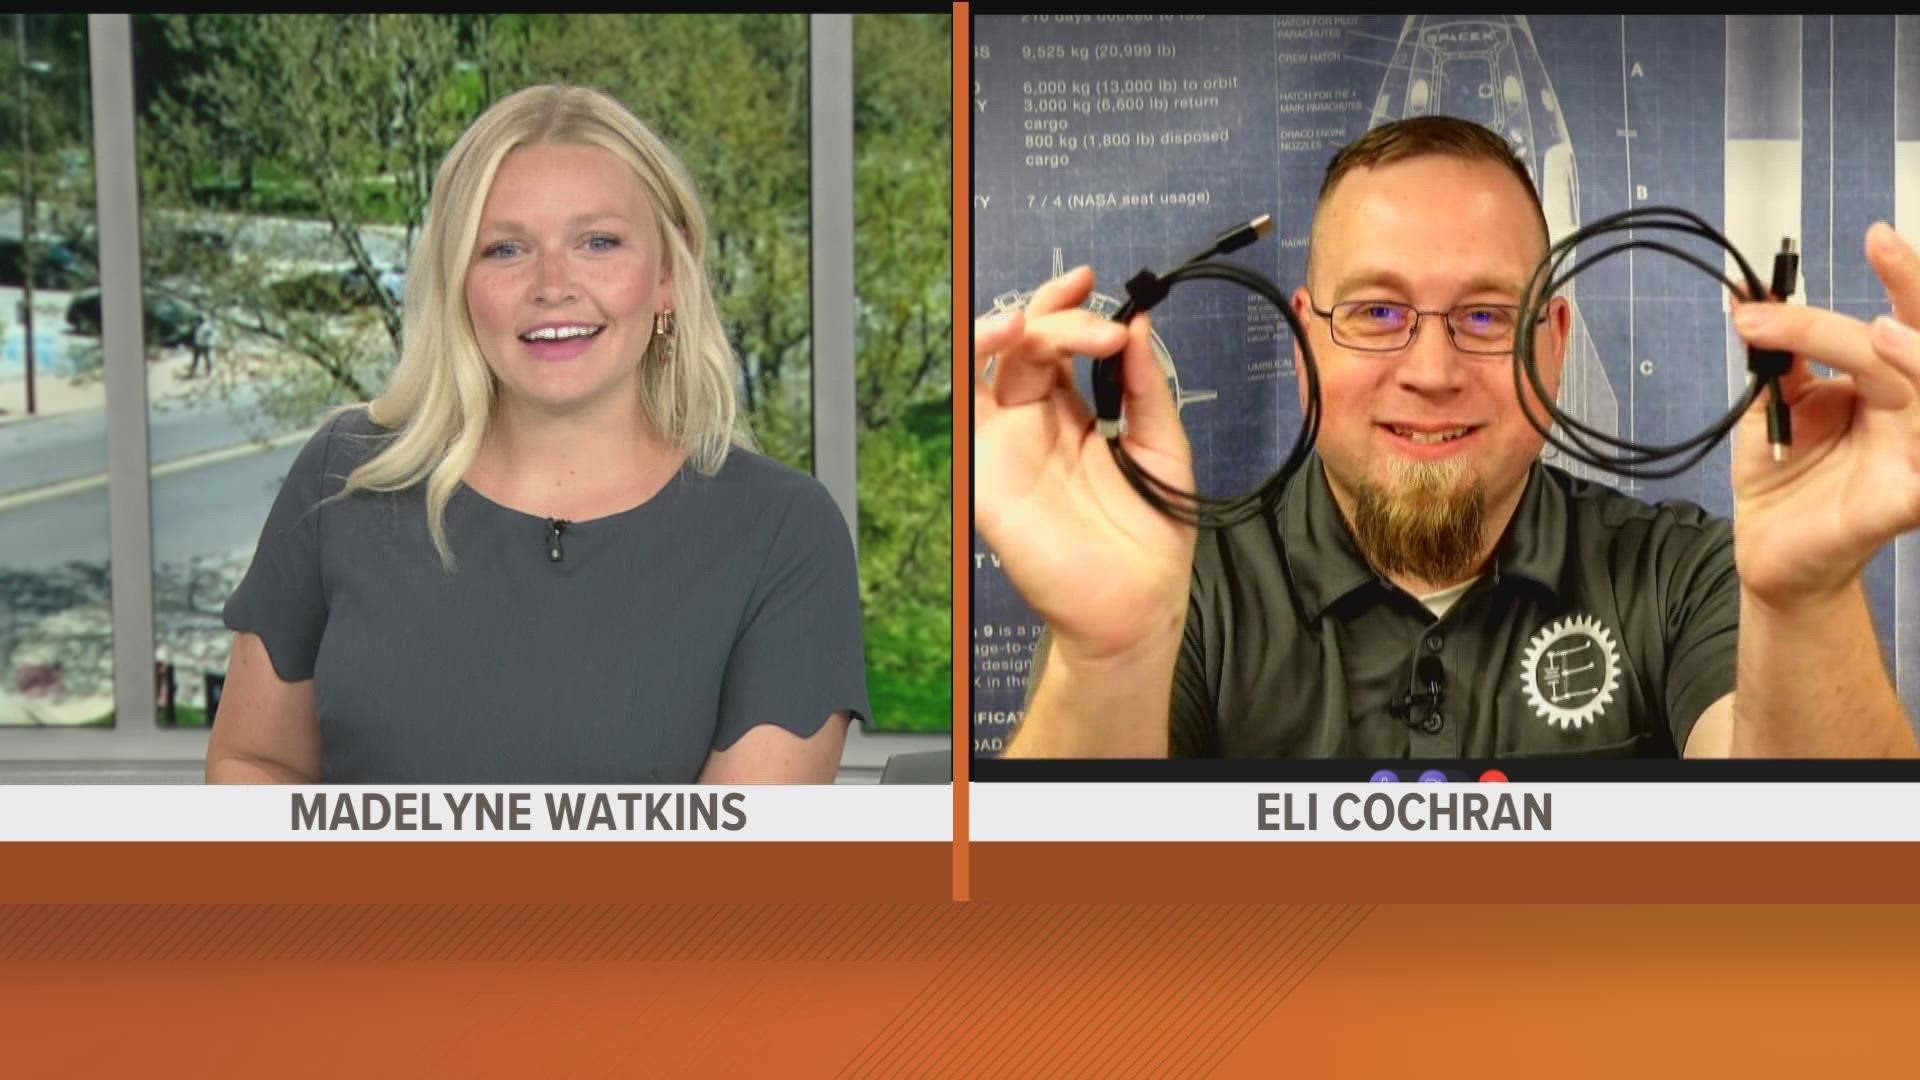 Eli Cochran is from Owens Community College and he joins WTOL 11 to give a hacking demonstration and to talk about a Cyber-Security Camp the college is hosting.